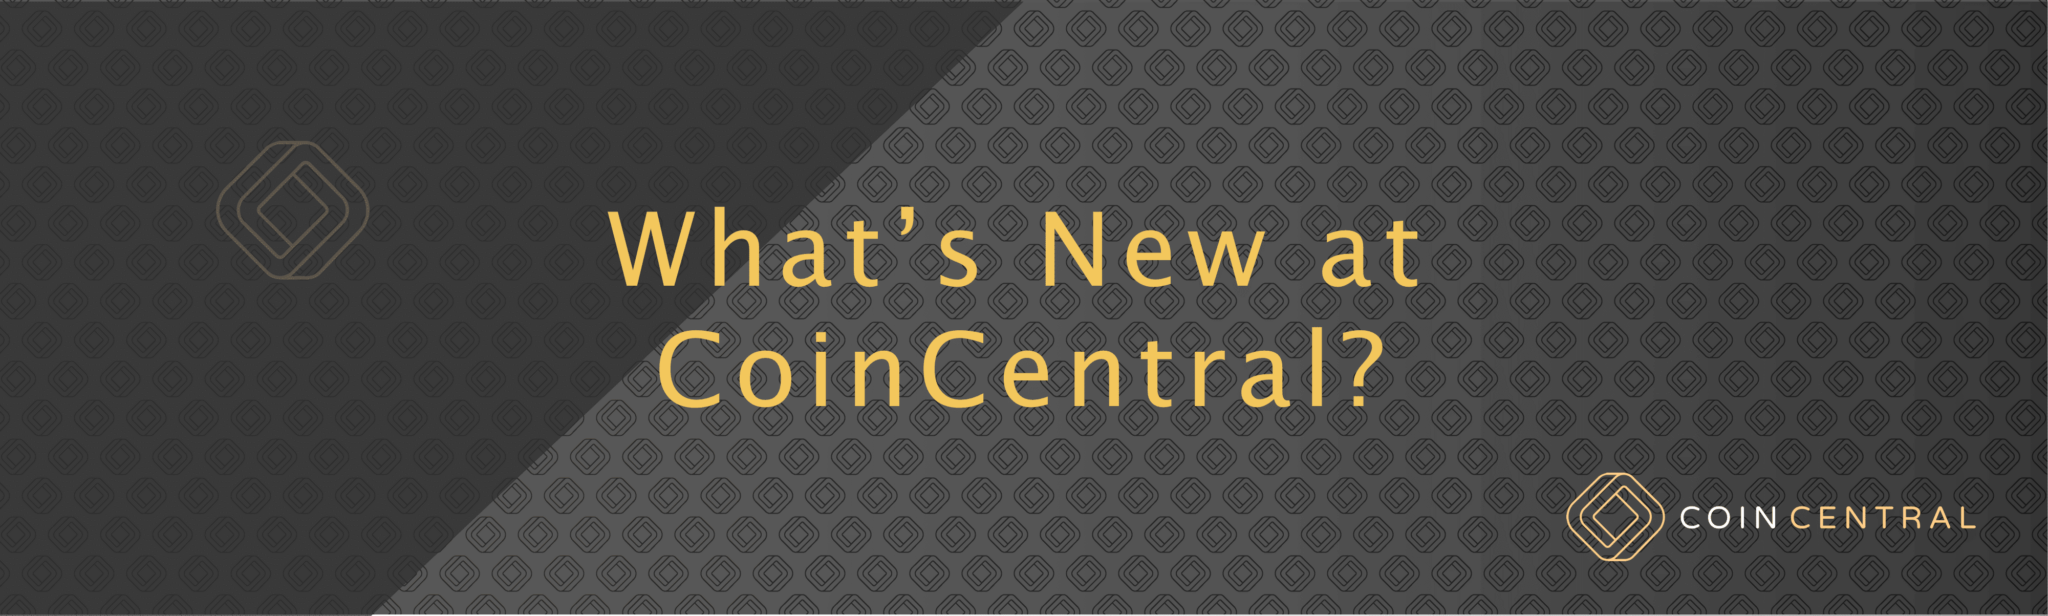   what's new to coincidence "width =" 4001 "height =" 1203 "srcset =" https: / /coincentral.com/wp-content/uploads/2018/08/whats-new-at-coincentral.png 4001w, https://coincentral.com/wp-content/ uploads / 2018/08 / whats-new-at-coincentral-300x90.png 300w, https://coincentral.com/wp-content/uploads/2018/08/whats-new-at-coincentral-768x231.png 768w, https://coincentral.com/wp-content/ upload / 2018/08 / whats-new-at-coincentral-874x263.png 874w, https://coincentral.com/wp-content/uploads/201 8/08 / whats-new-at-coincentral-600x180.png 600w "sizes =" (max-width: 4001px) 100vw, 4001px 